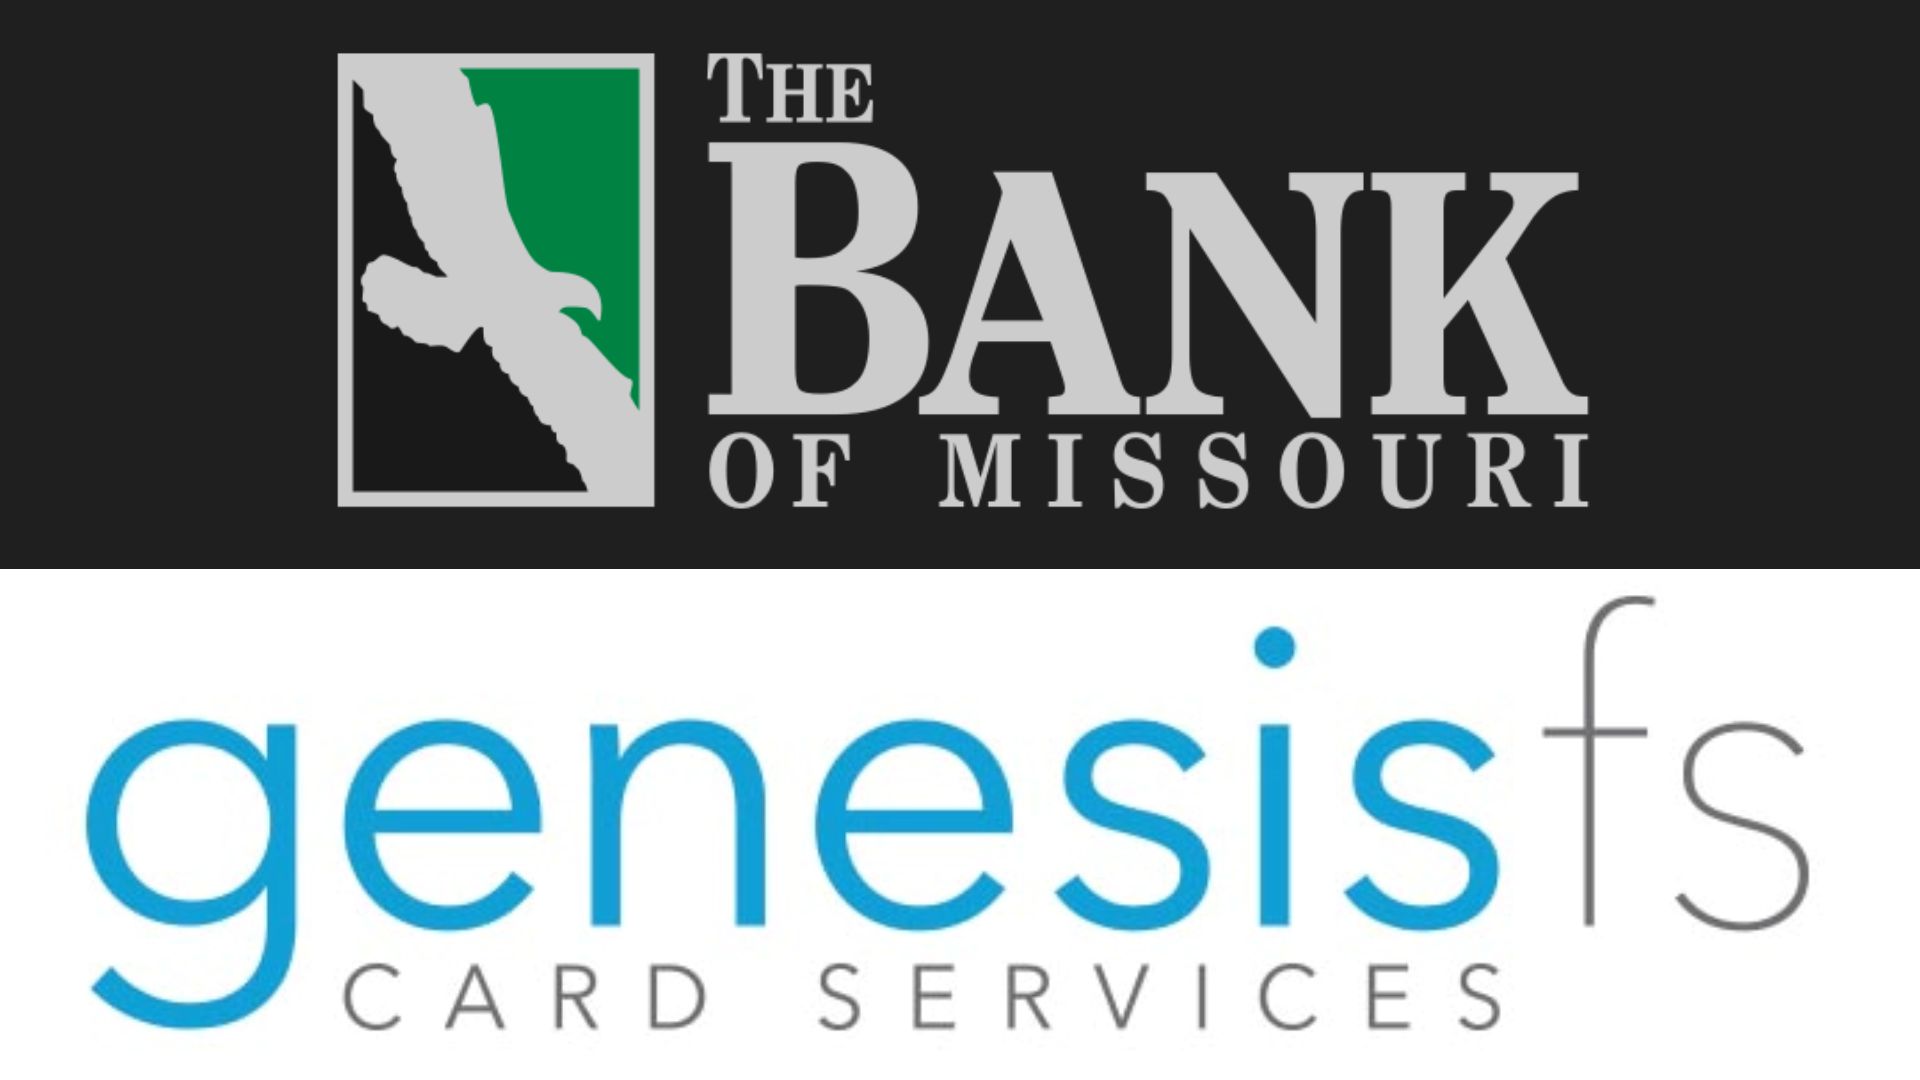 About the Issuer: Bank of Missouri and Genesis Card Services